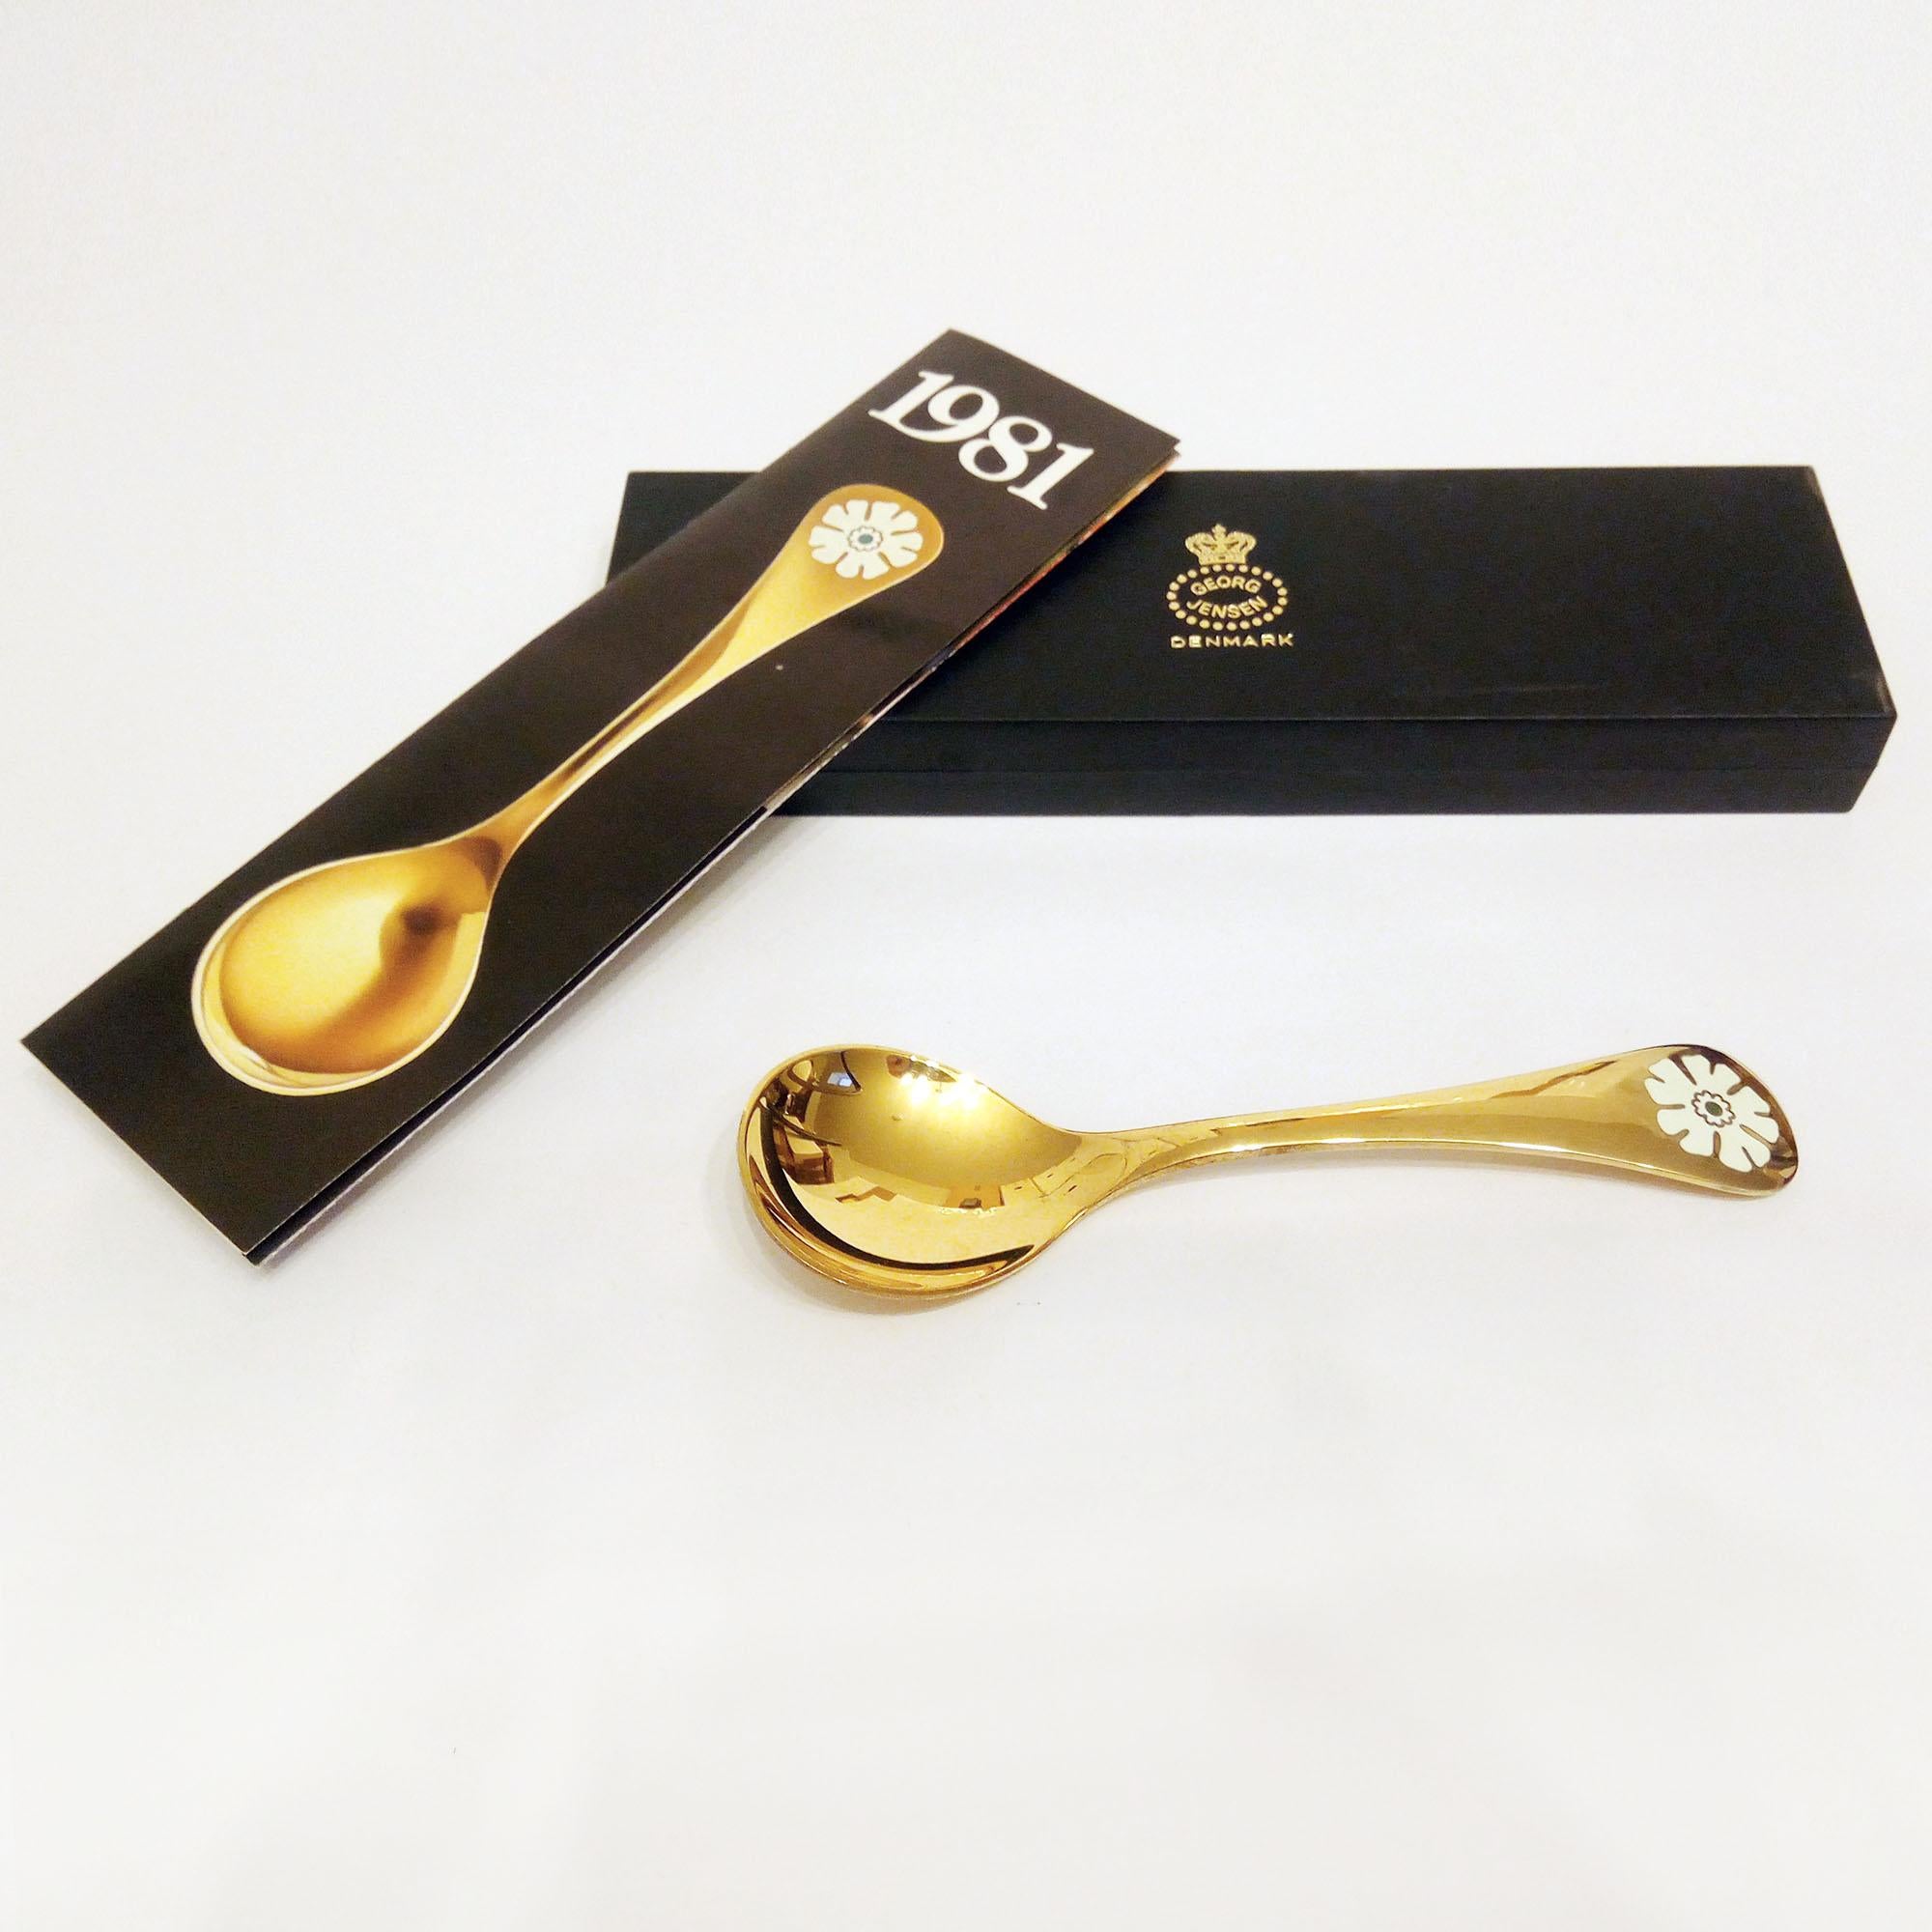 Annual spoon 1981 in original box, designed by Annelise Björner, edited by Georg Jensen.
Annual Spoons series began in 1971. Each spoon is crafted in sterling silver, then gold plated and enameled with a wildflower chosen for that year. The 1981